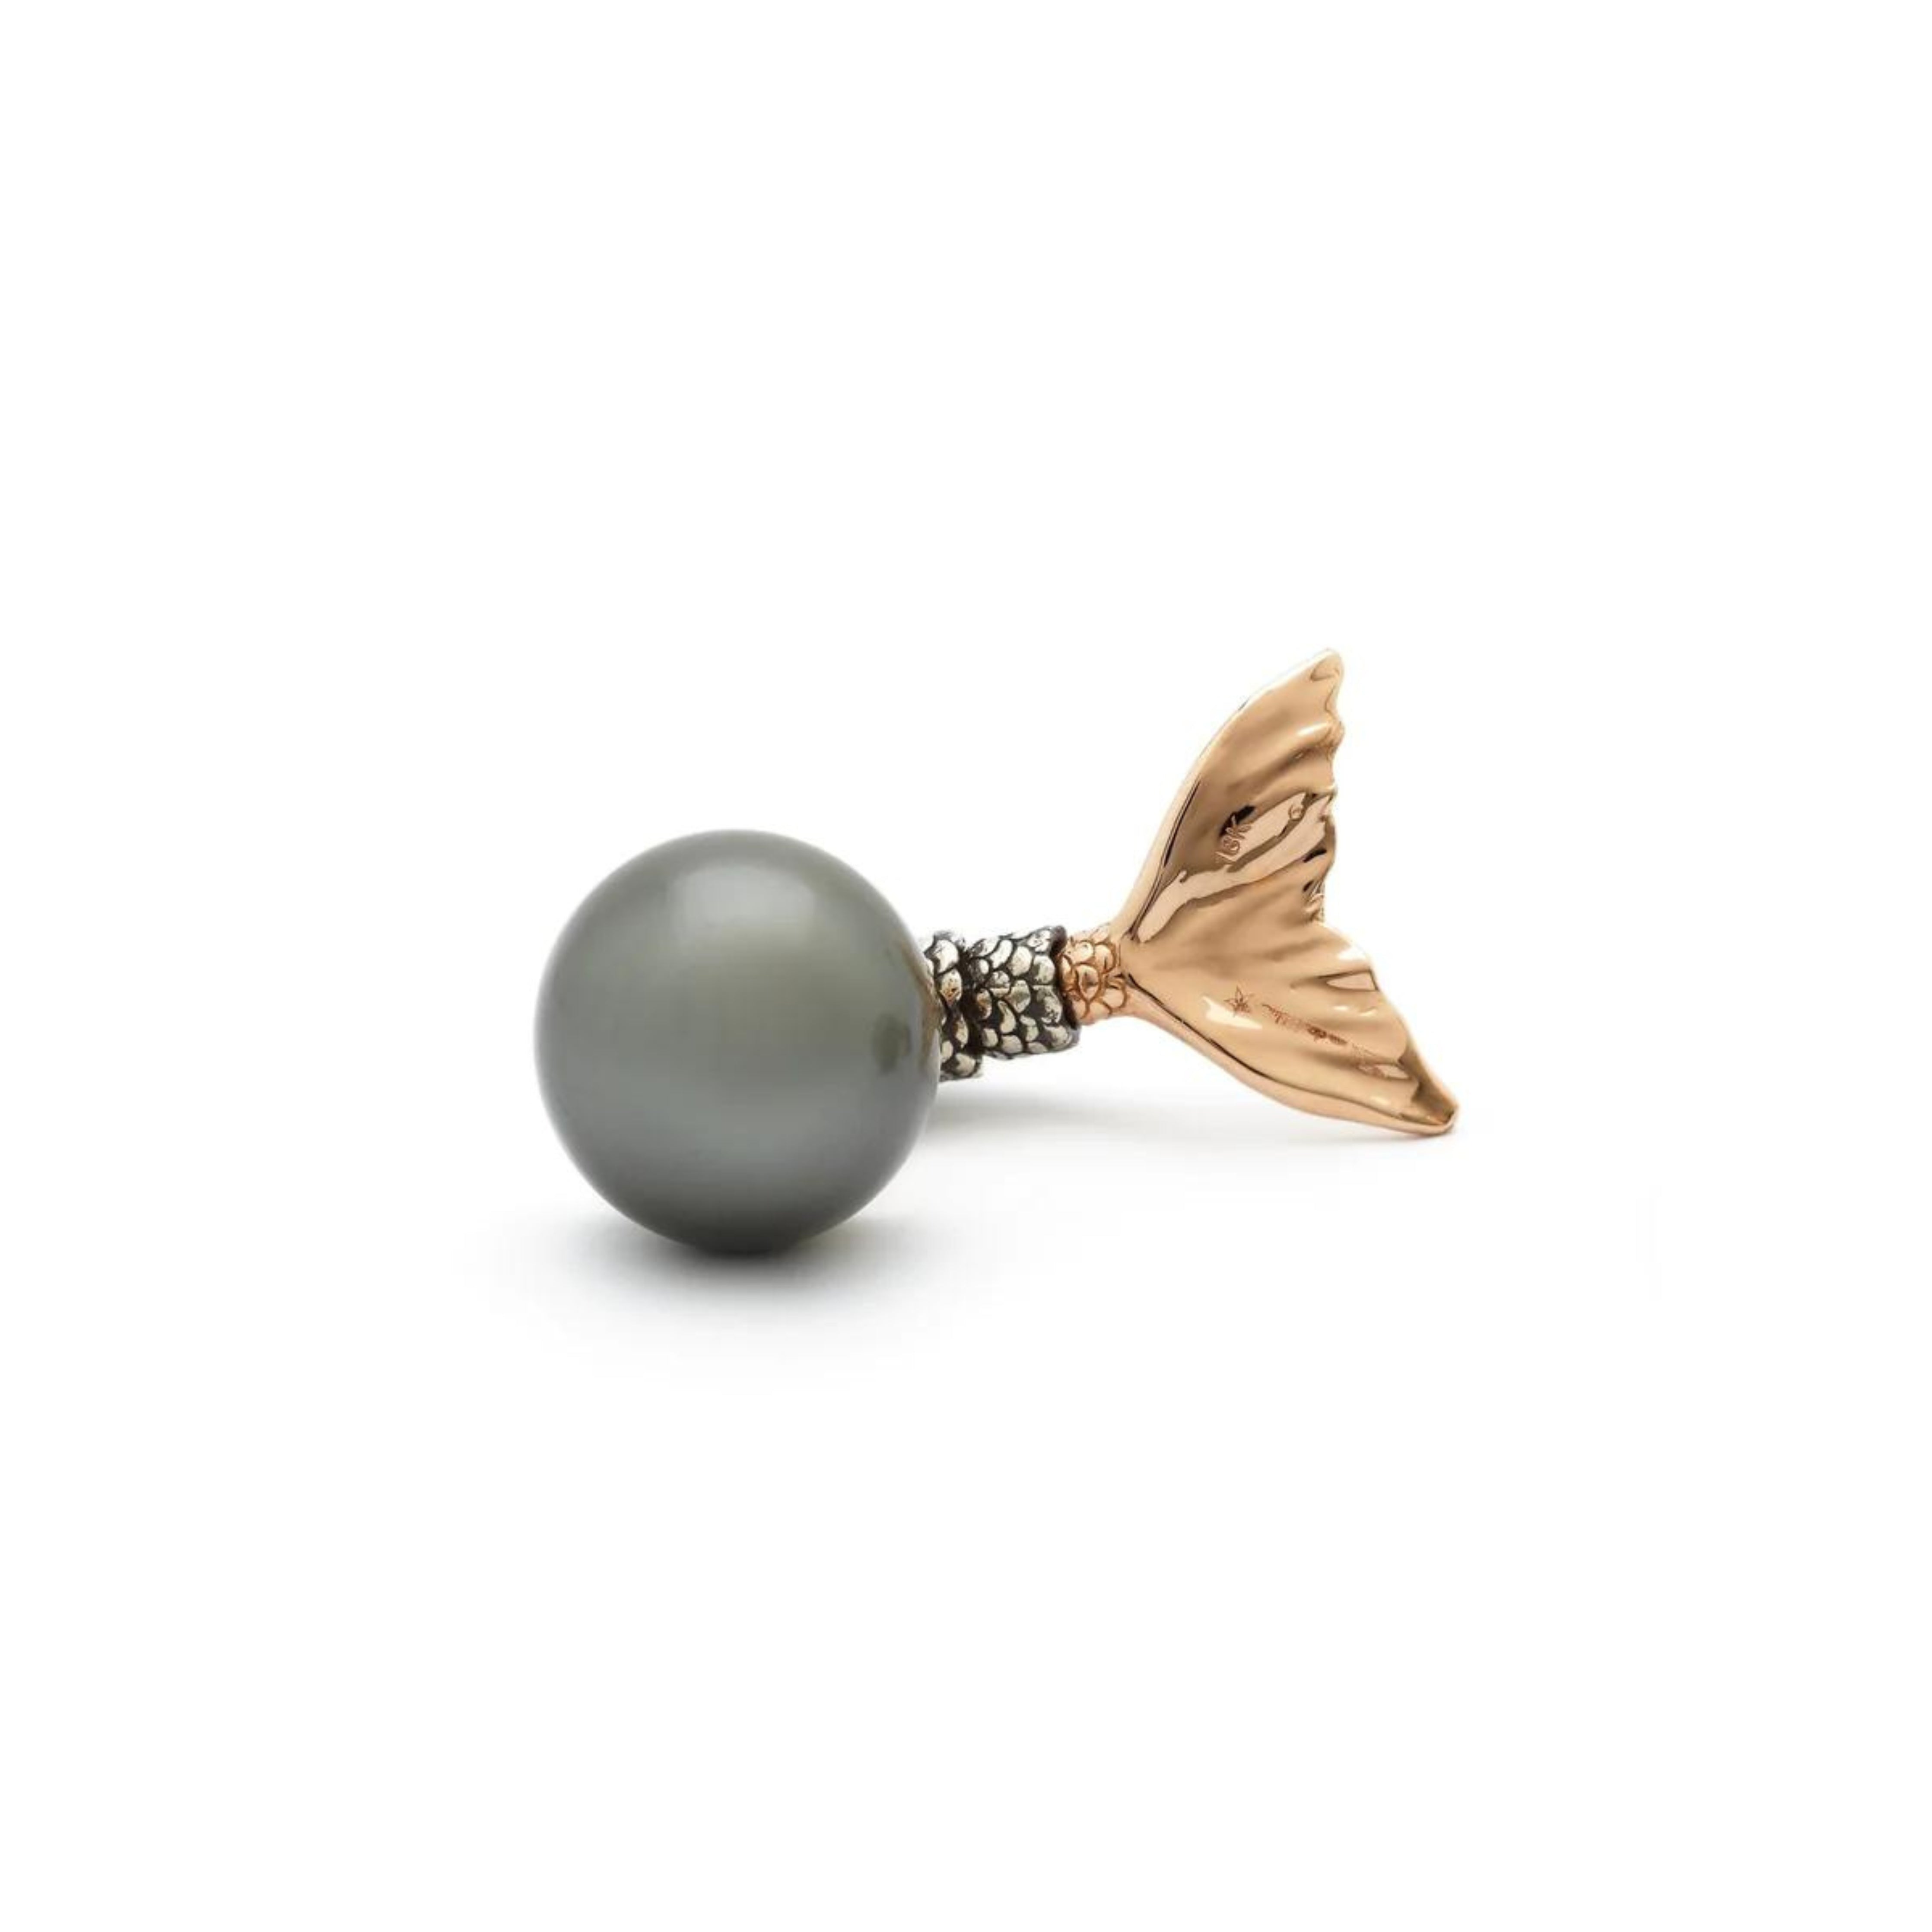 Bibi van der Velden Mermaid Pearl Earring. Made in 18K rose gold and sterling silver with a deep blue pearl and brown diamonds. Featuring a moving mermaid's tail with moving scales and gold fin. Shown from the front and side..